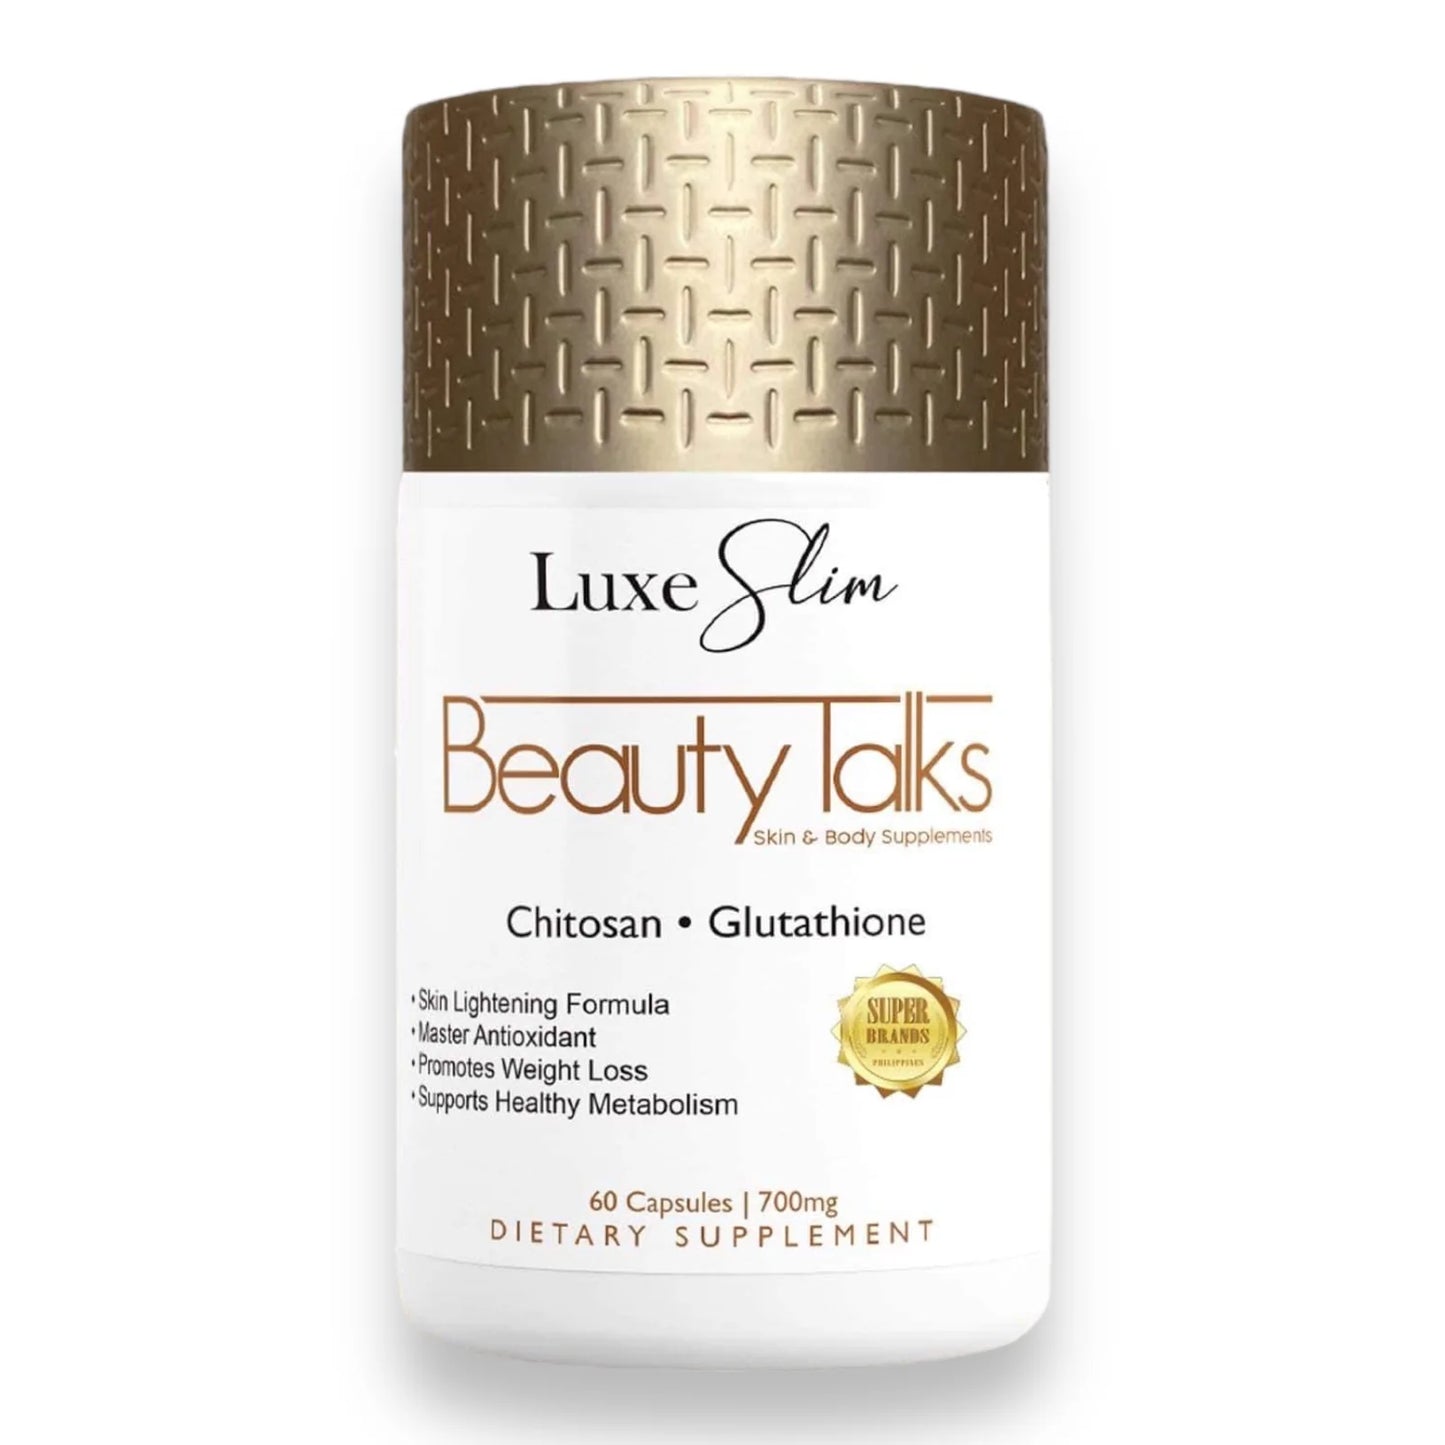 Luxe Slim - Beauty Talks Skin and Body Supplements (by Anna Magkawas)